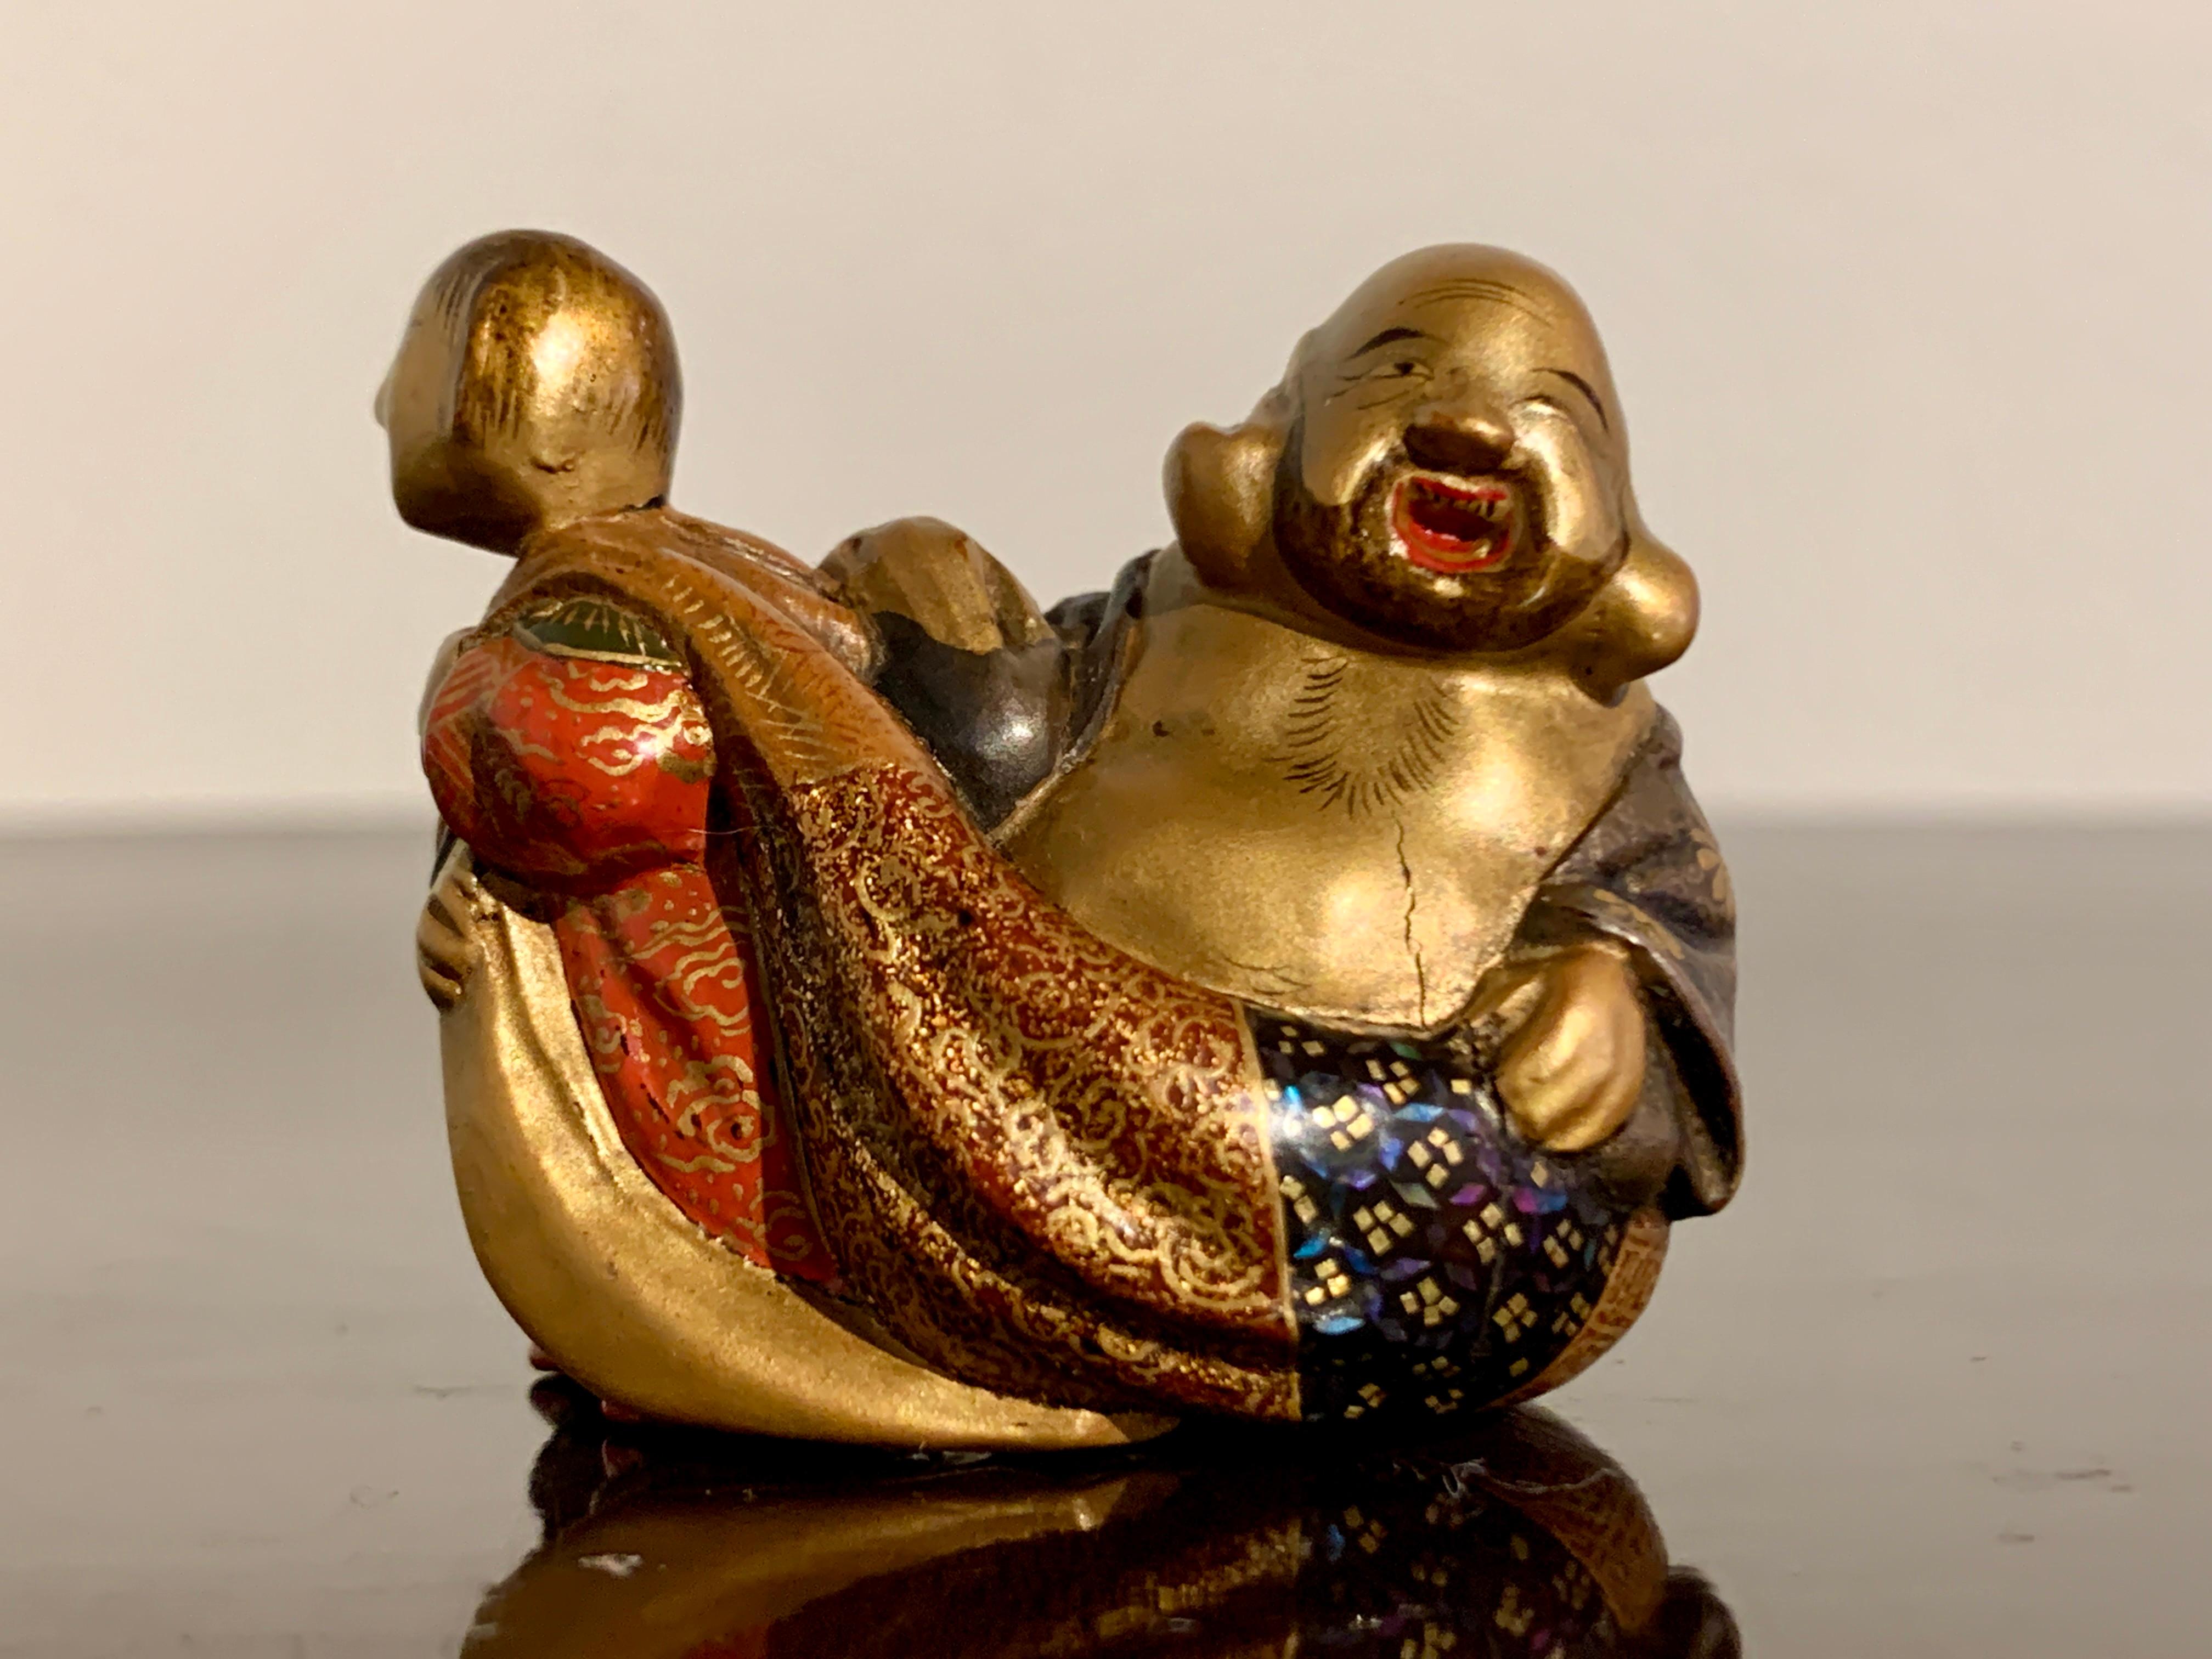 A charming and finely decorated carved and lacquered boxwood netsuke of Hotei by Shunsho (probably Shunsho XI, Masaoki), Meiji period, circa 1900, Japan.

This delightful and colorful netsuke features the beloved figure Hotei, one of the Seven